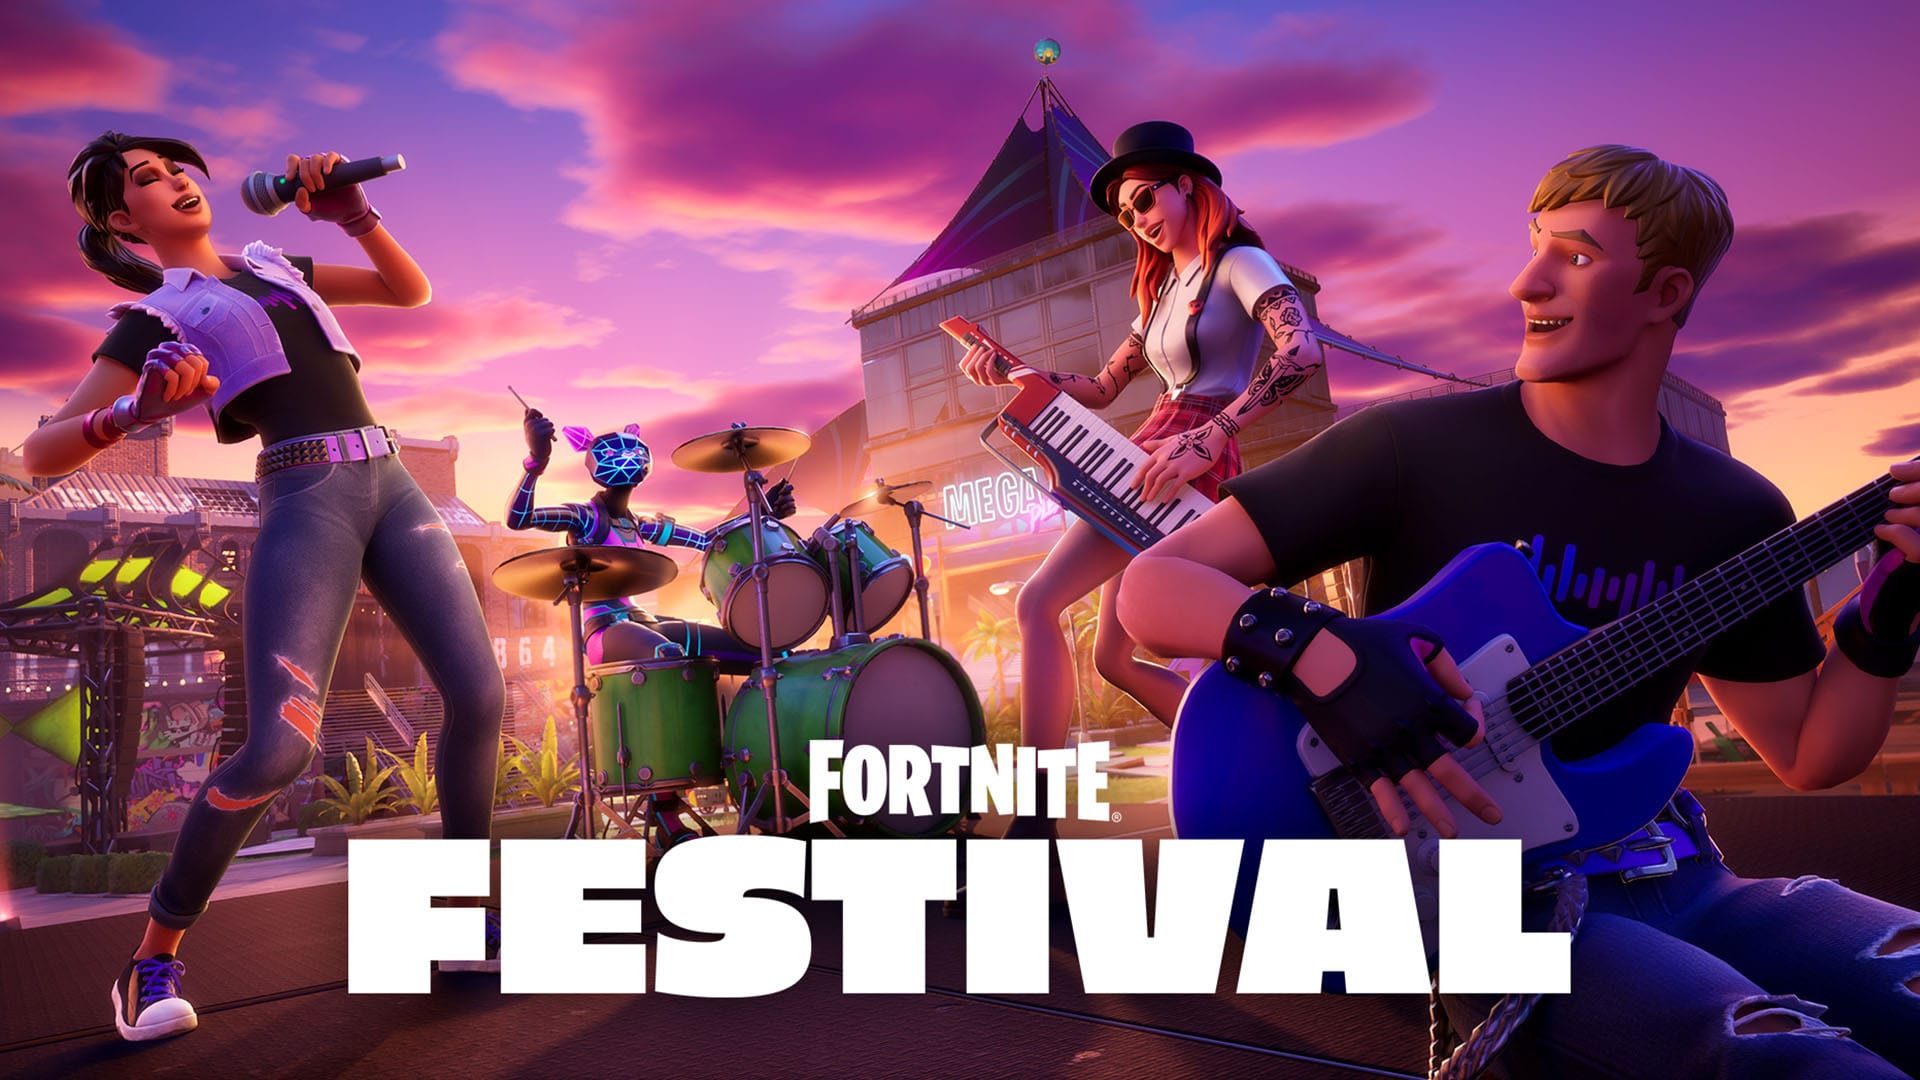 Fortnite Festival Launches With Over 600,000 Concurrent Players as LEGO Fortnite Passes 2.4 Million